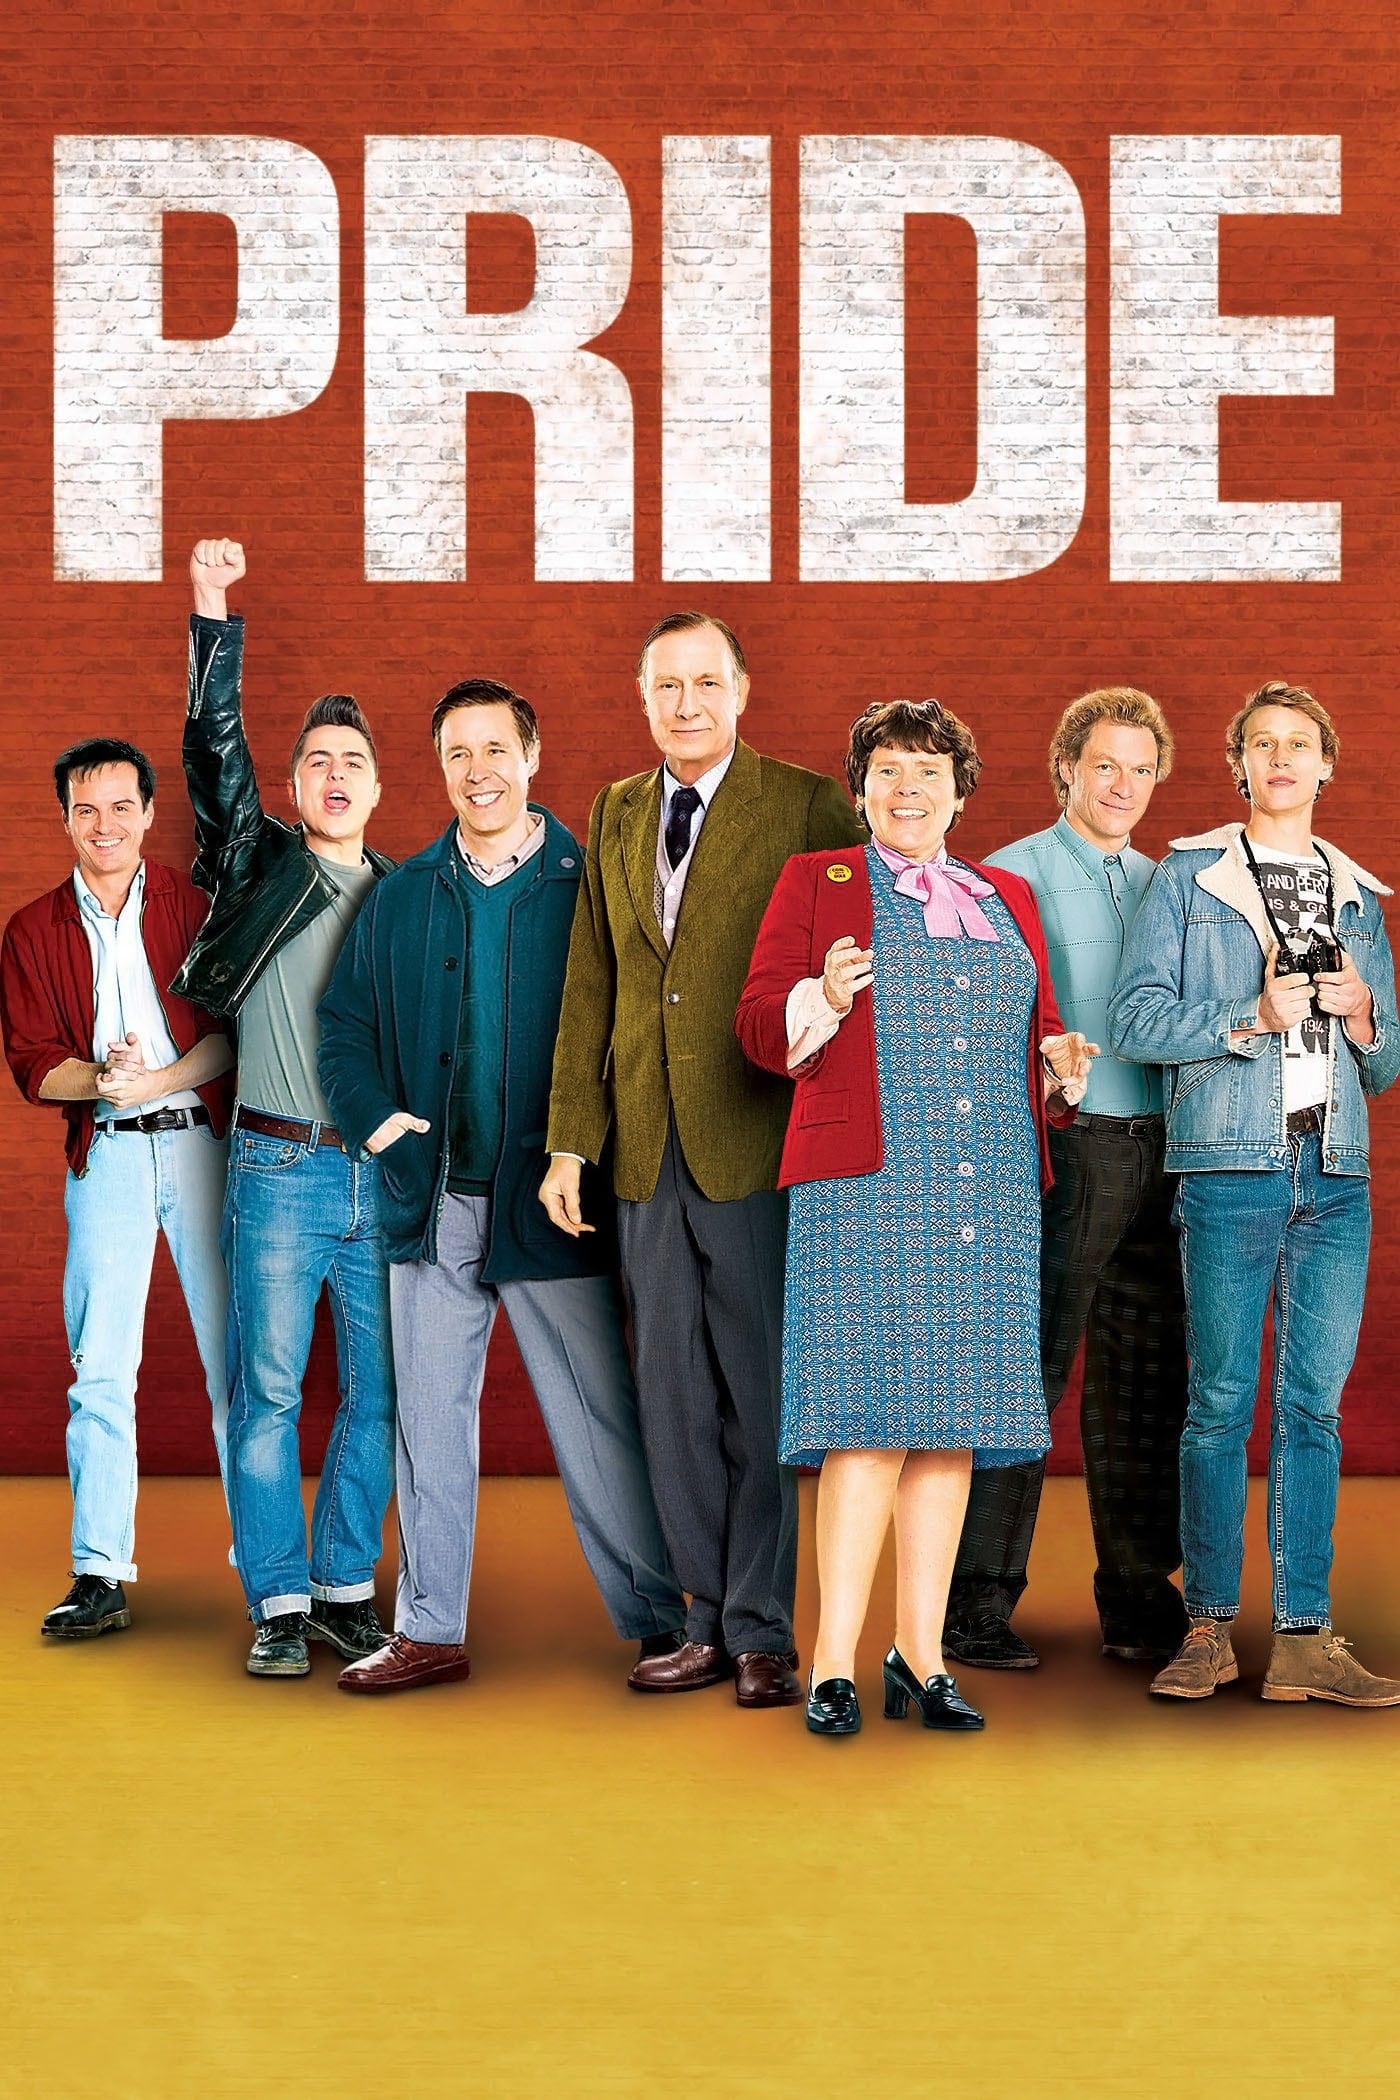 Movie promo image for Pride, which shows the title in white paint on a brick wall with a bunch of the all white cast beneath it. 